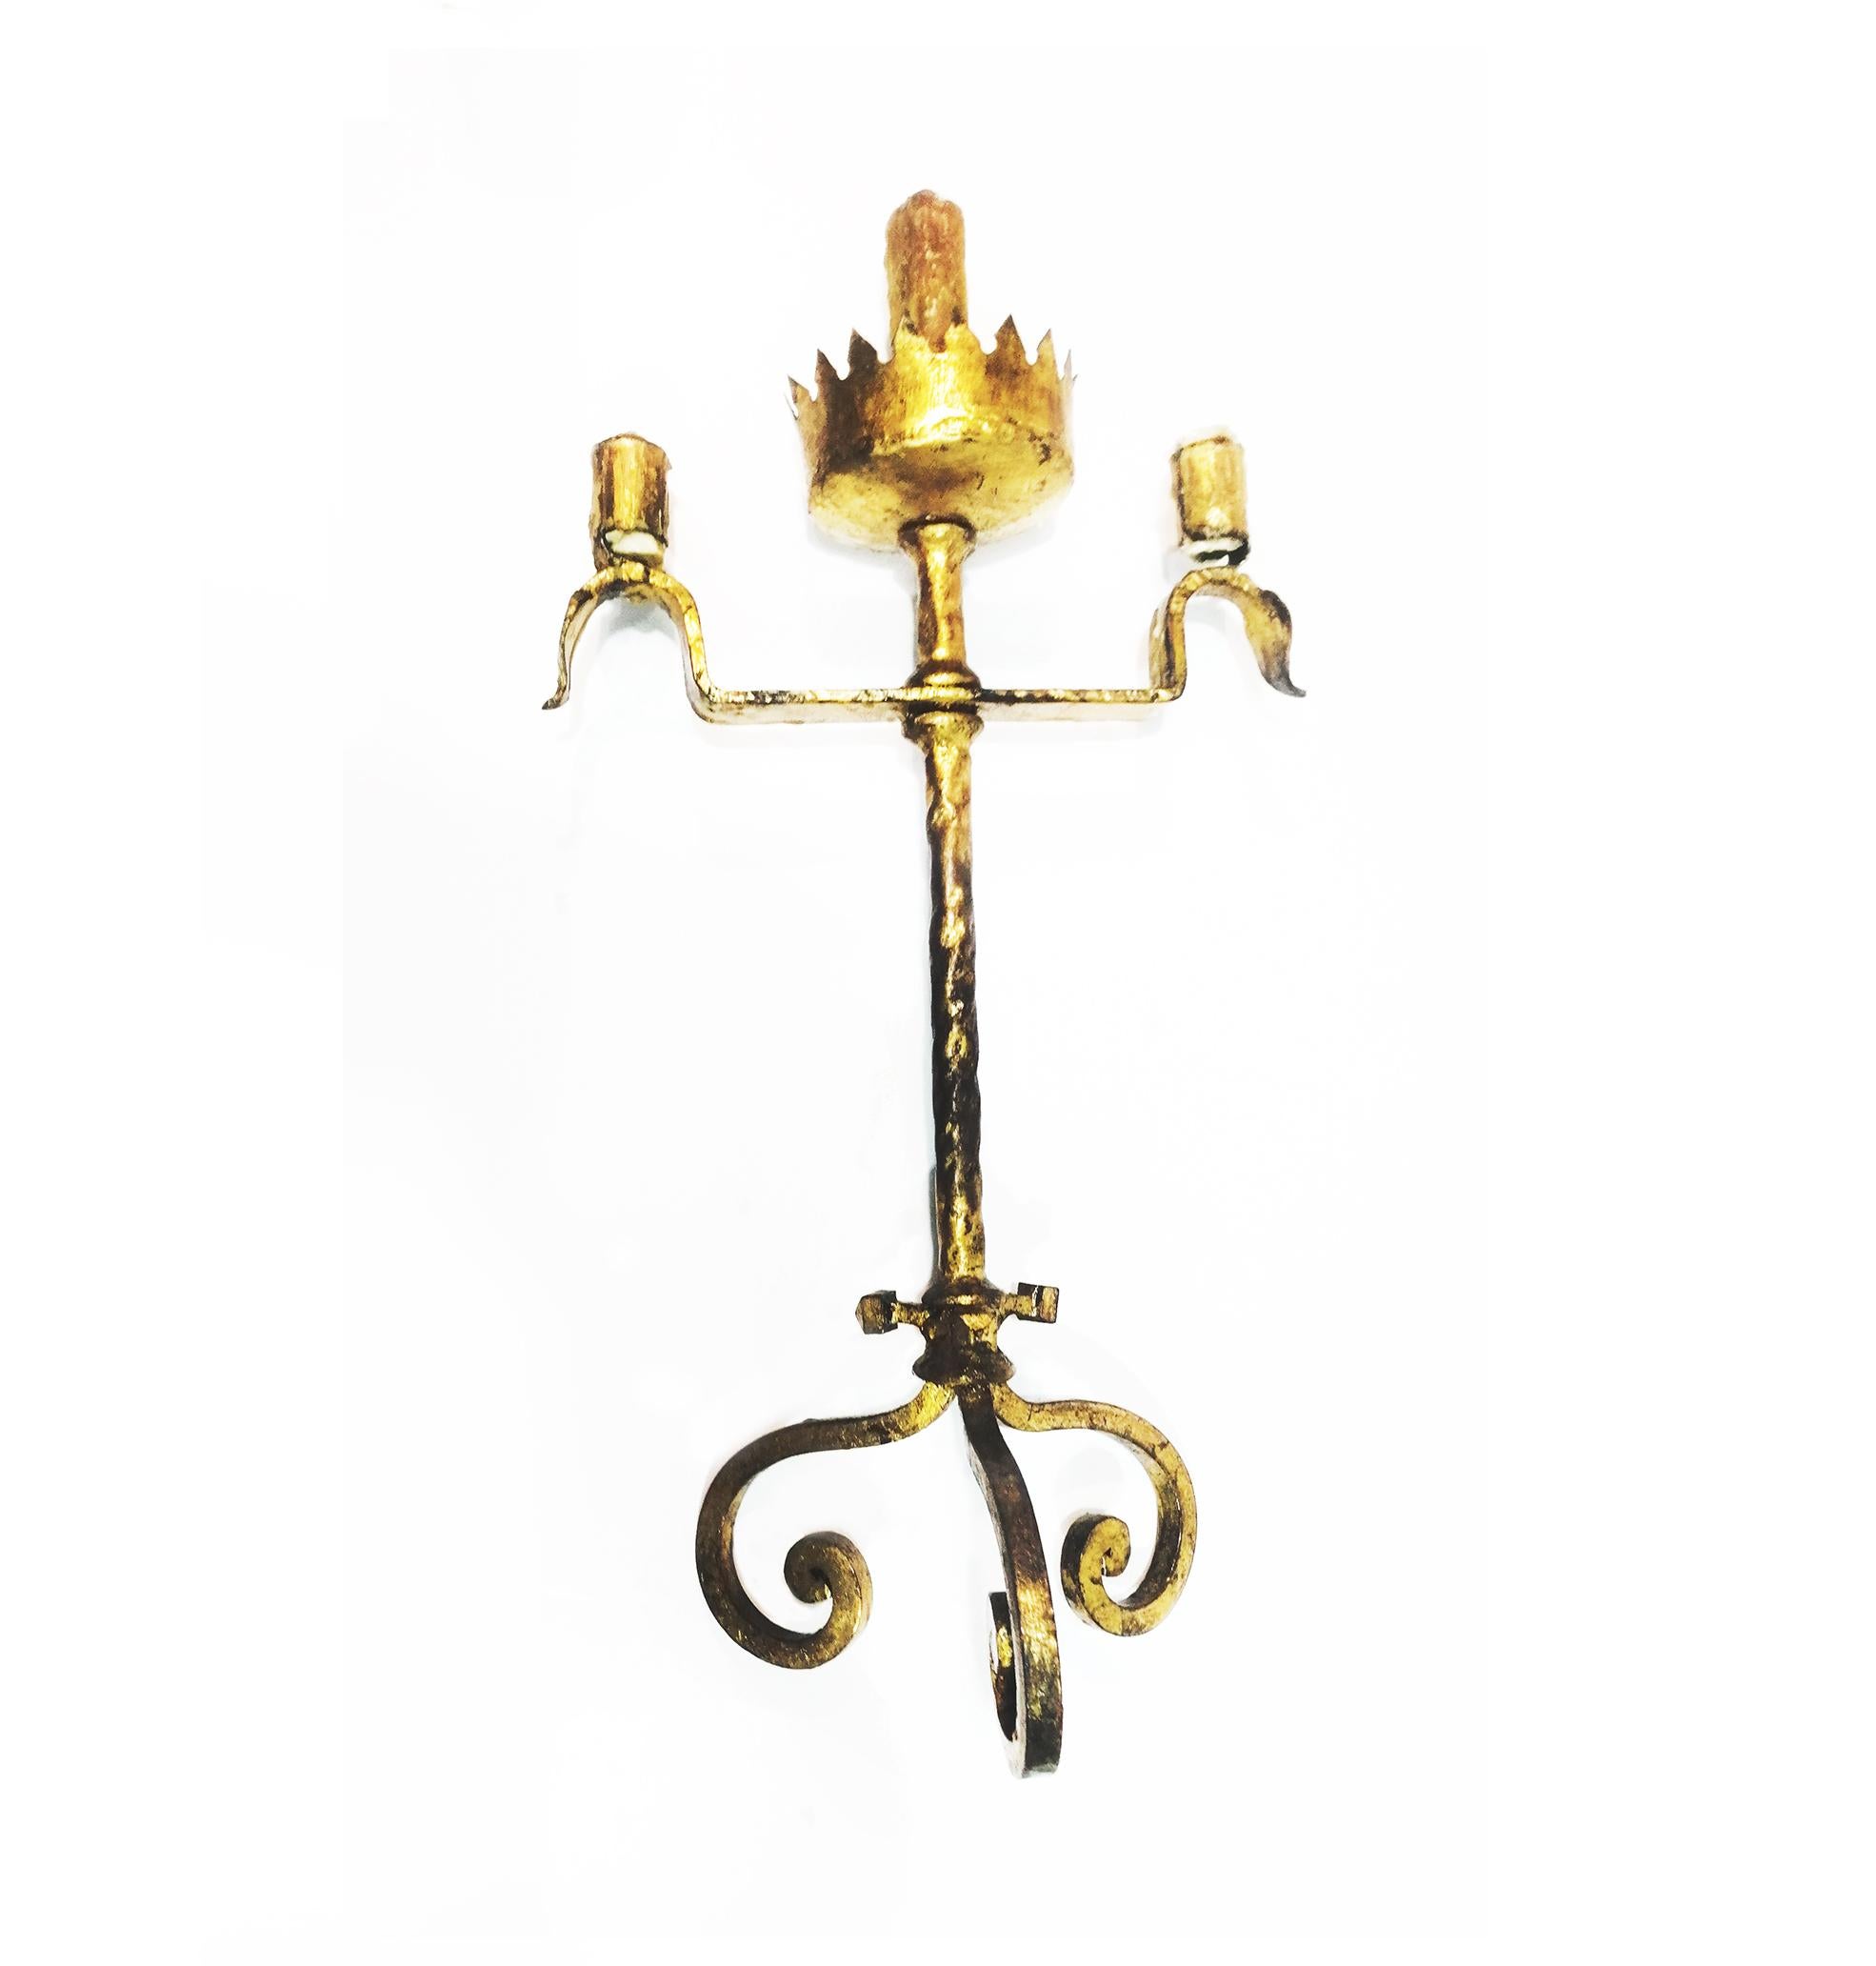 Wrought Iron and Gold  Votive Candelabra Electrified or Table Lamp For Sale 2